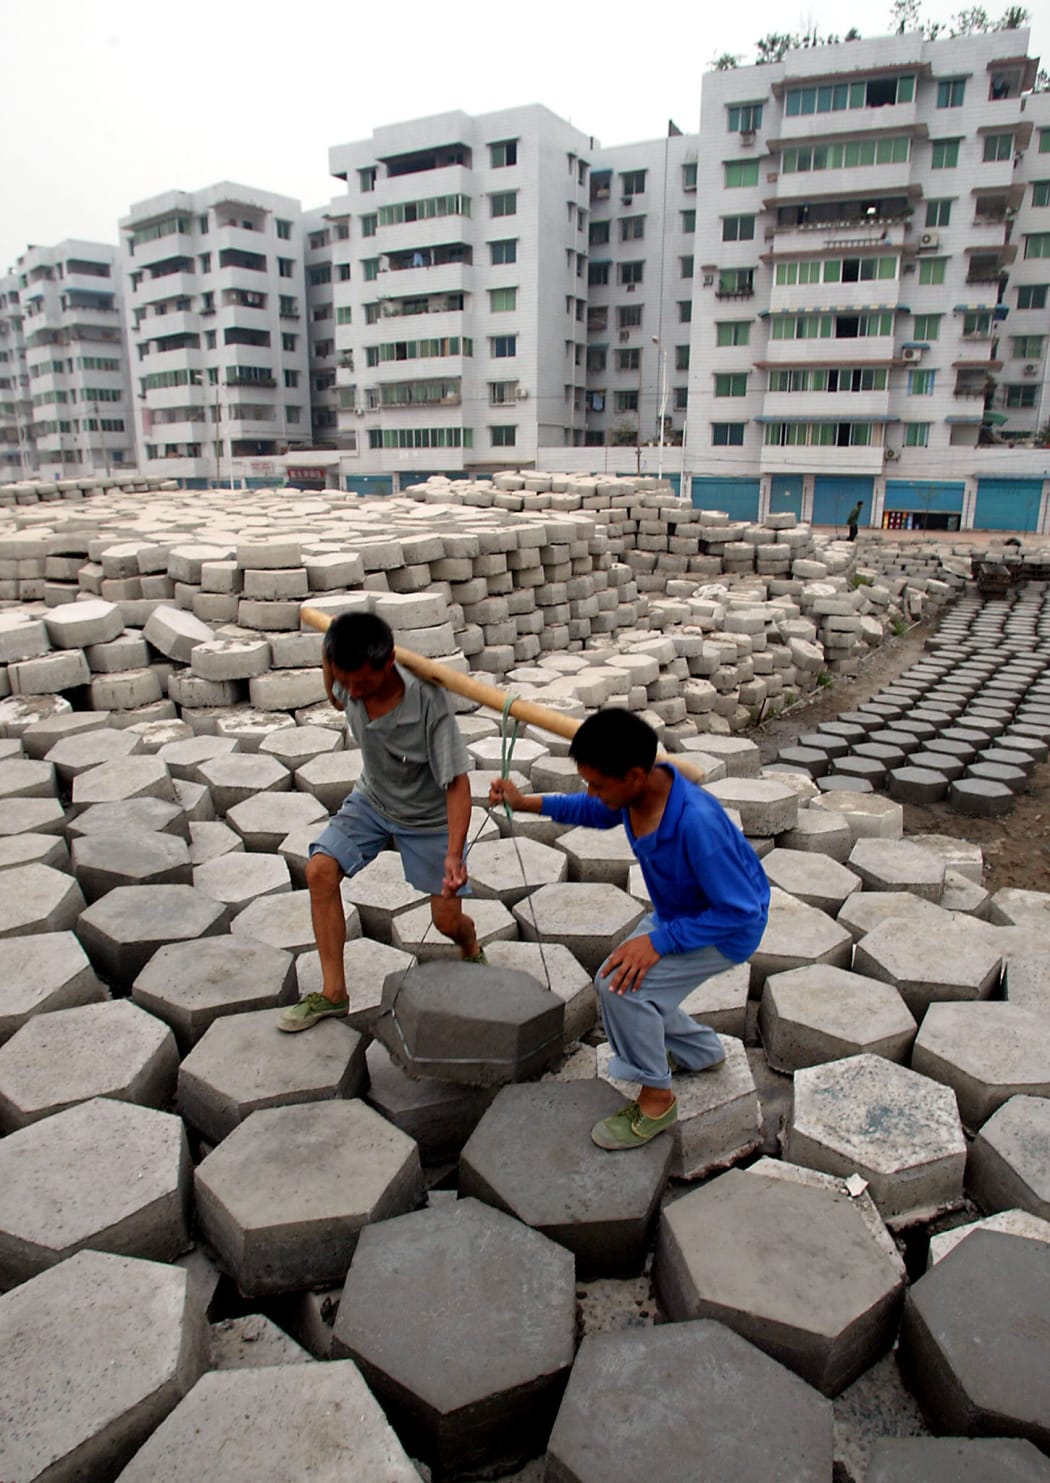 Workers carry the cement slabs which will be laid along the banks of the Yangtze River, to prevent soil erosion at the new Fengdu town with newly built apartments blocks in the background, upriver from the giant Three Gorges dam project, 16 June 2003.